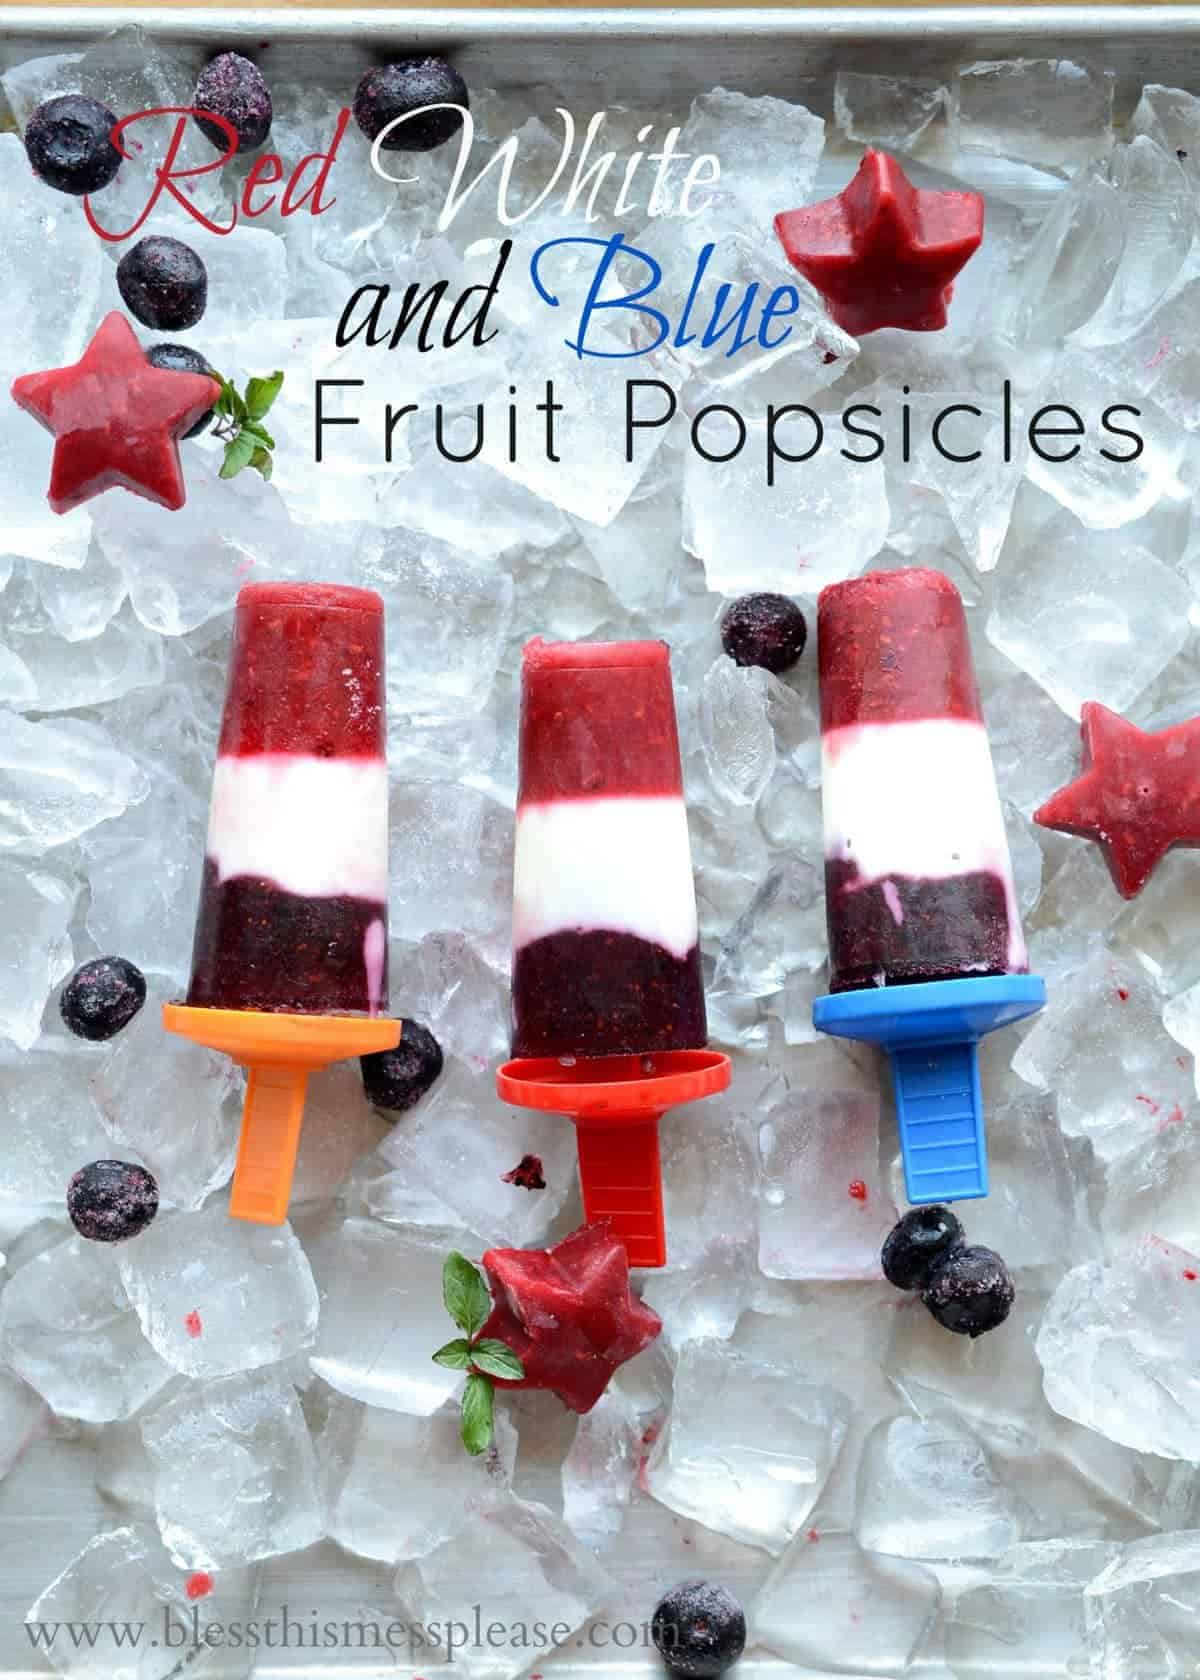 Red White and Blue Popsicles - Only 3 ingredients